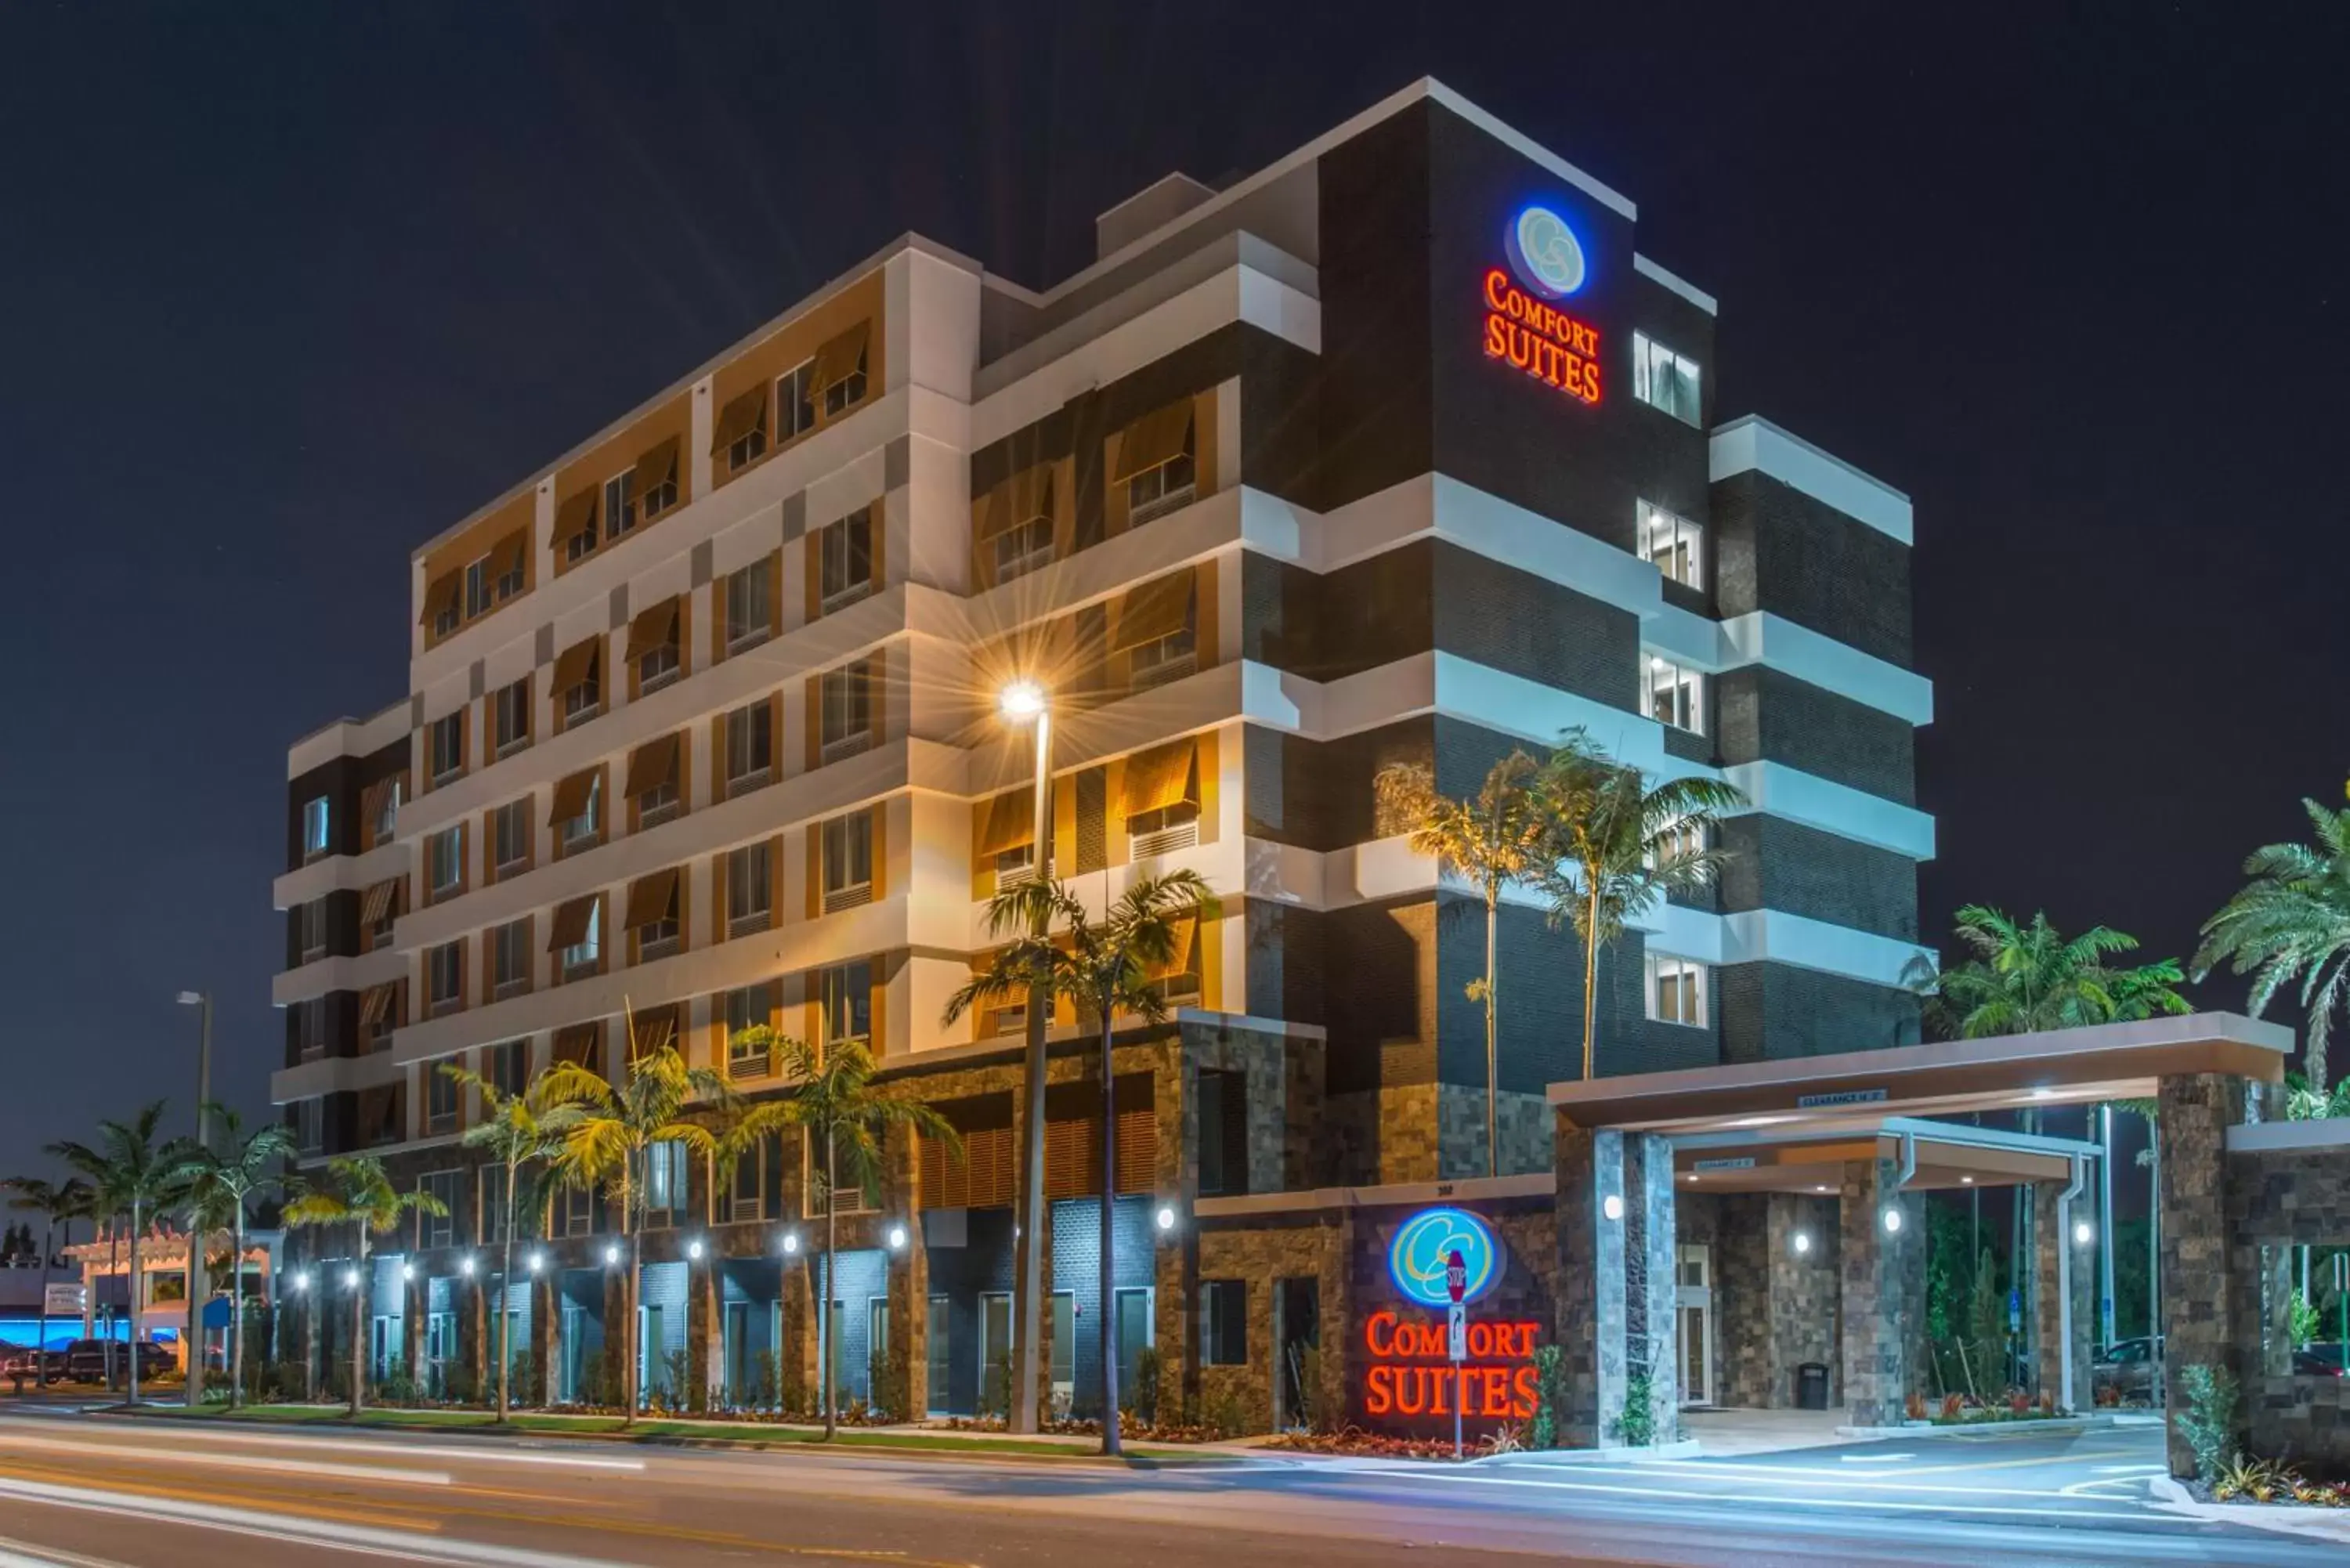 Property building in Comfort Suites Fort Lauderdale Airport & Cruise Port